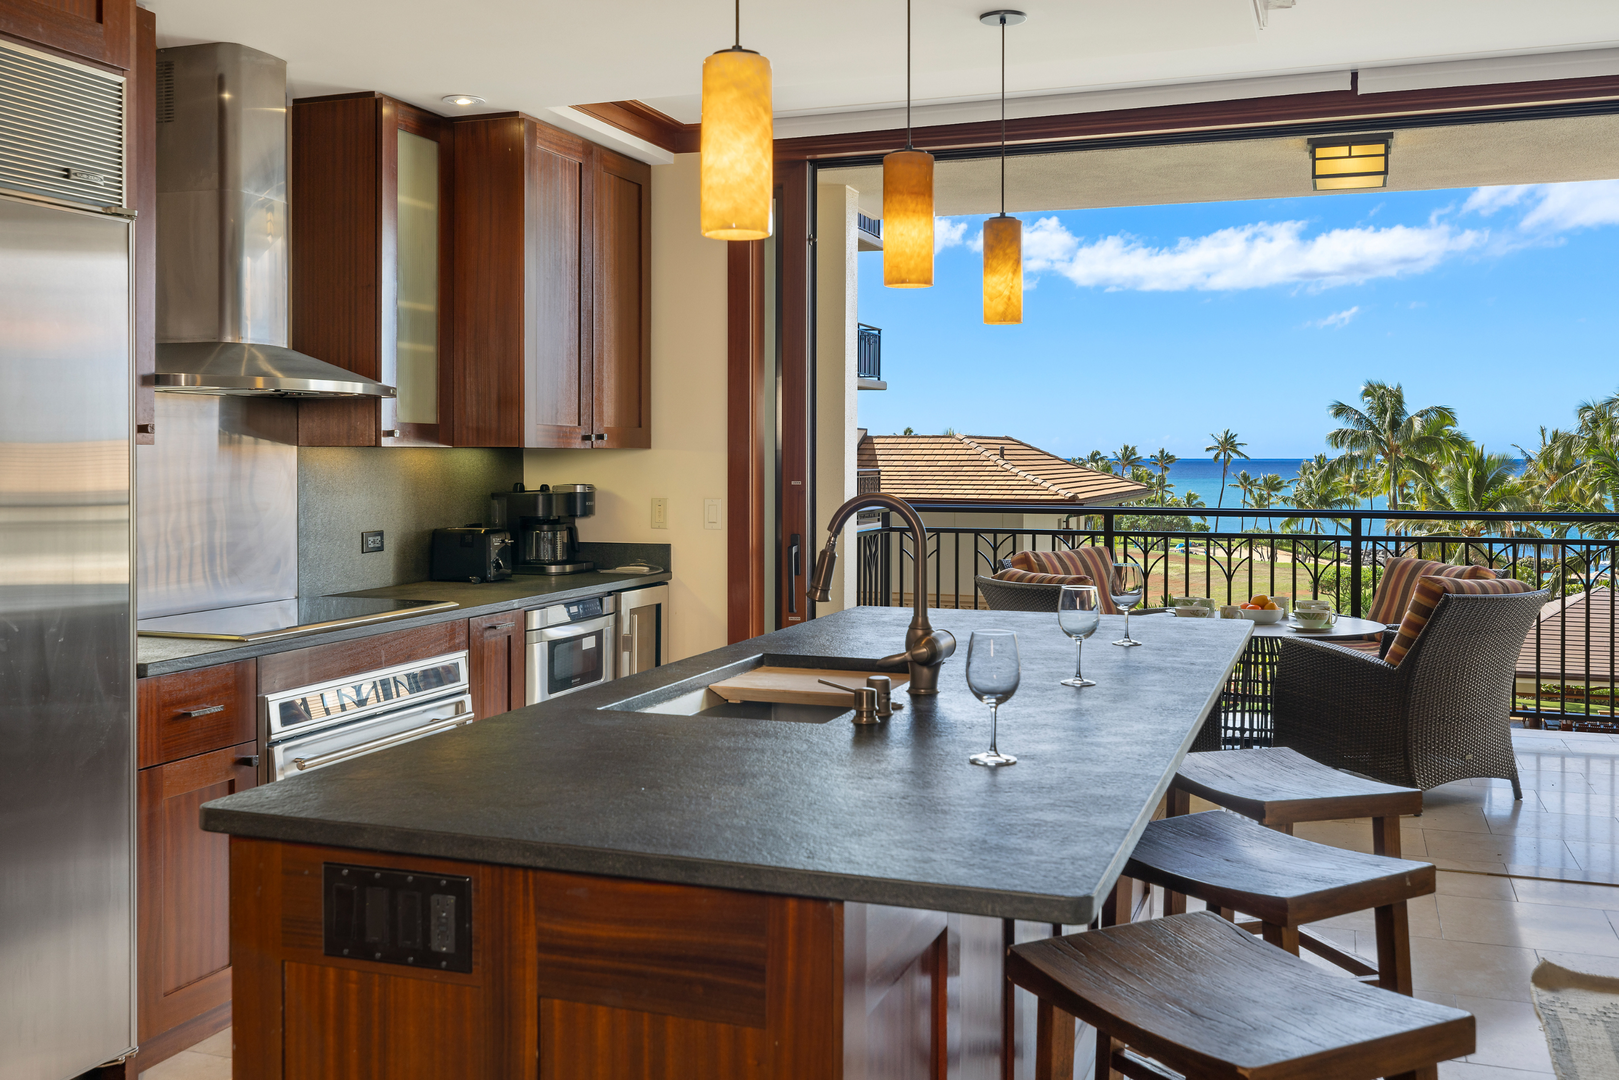 Kapolei Vacation Rentals, Ko Olina Beach Villas O505 - Counter seating means time visiting with the chef, and taking in ocean views.